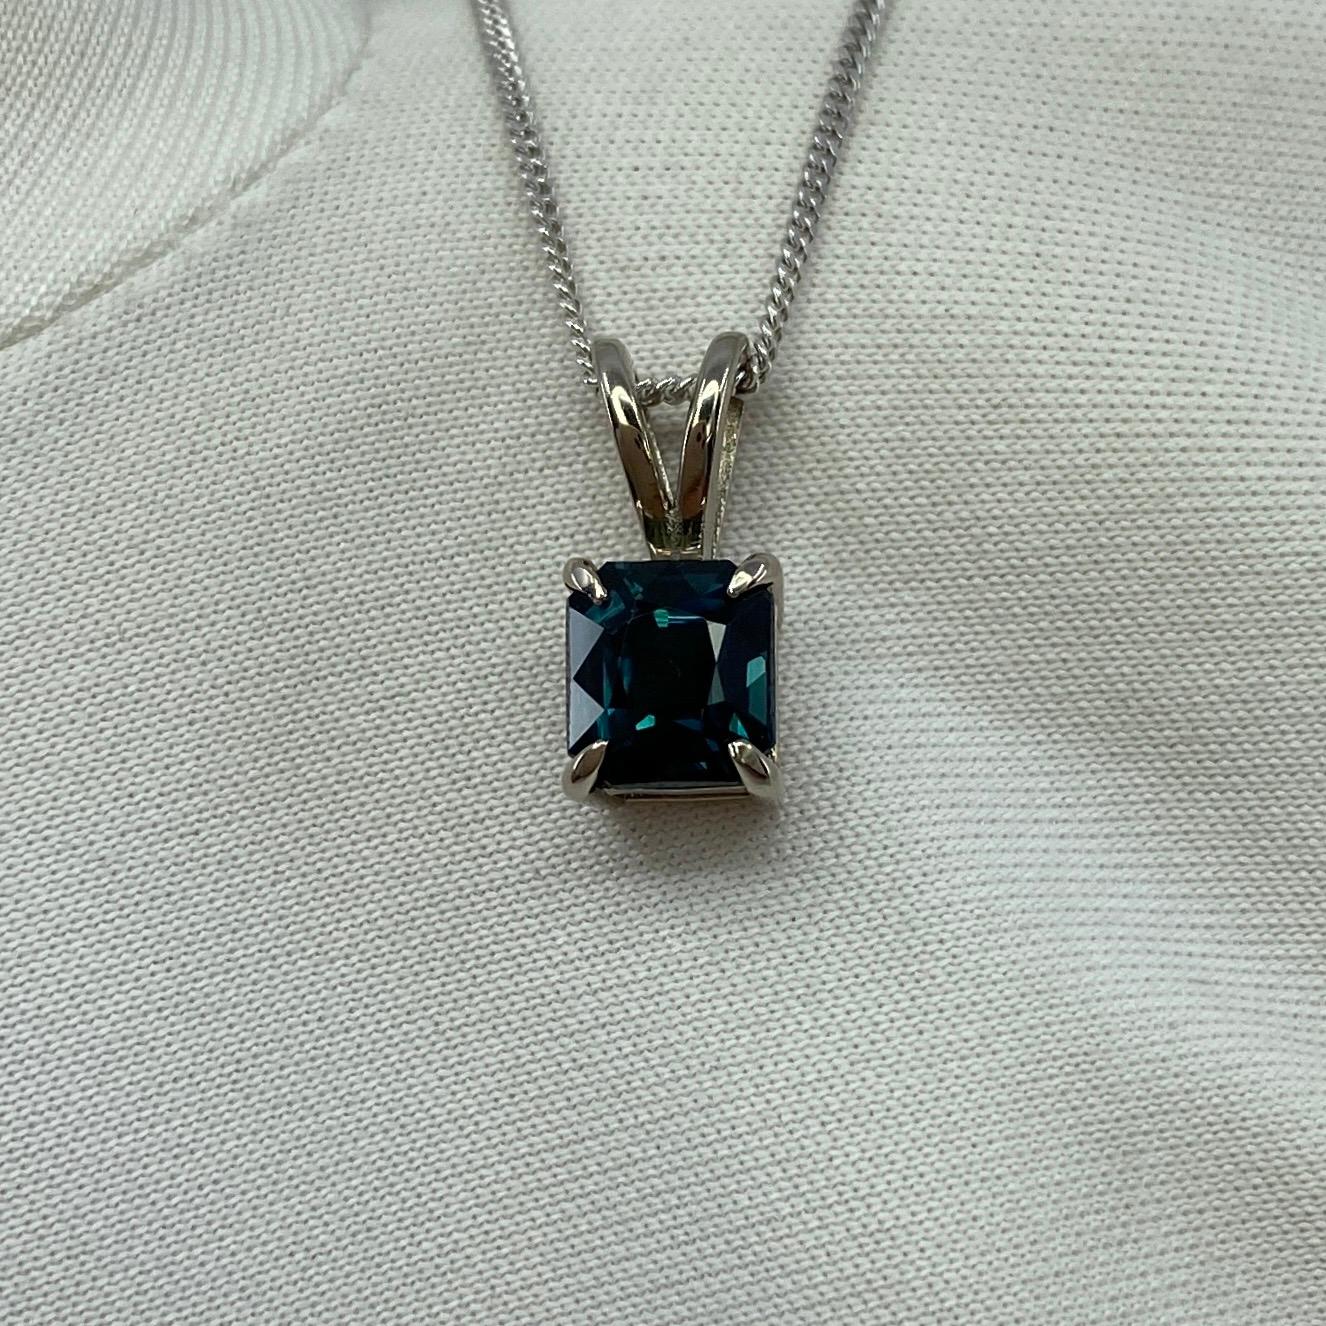 1.44ct IGI Certified Deep Teal Blue Untreated Sapphire 18k White Gold Pendant For Sale 2